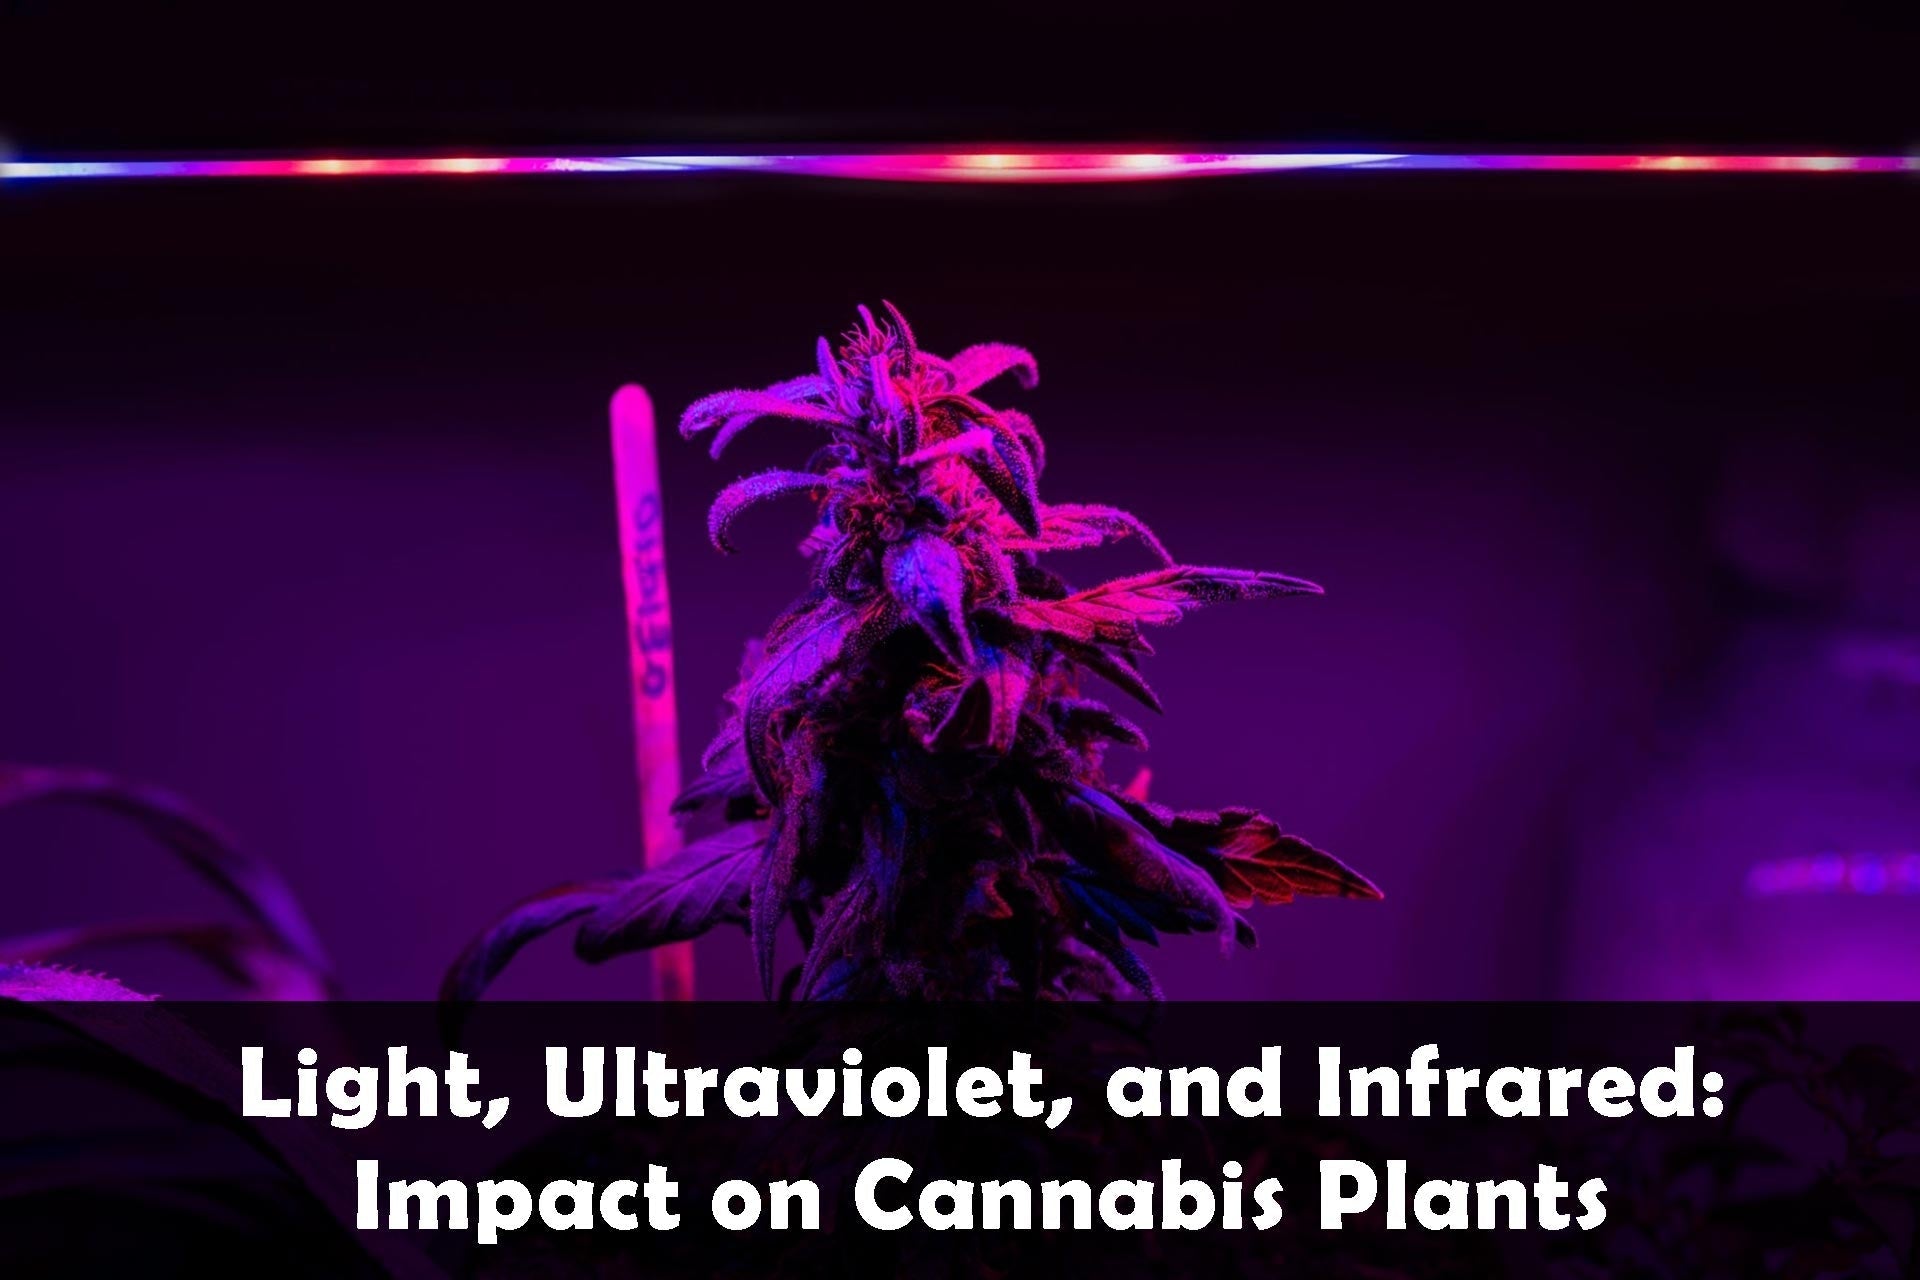 Light, Ultraviolet, and Infrared: Impact on Cannabis Plants